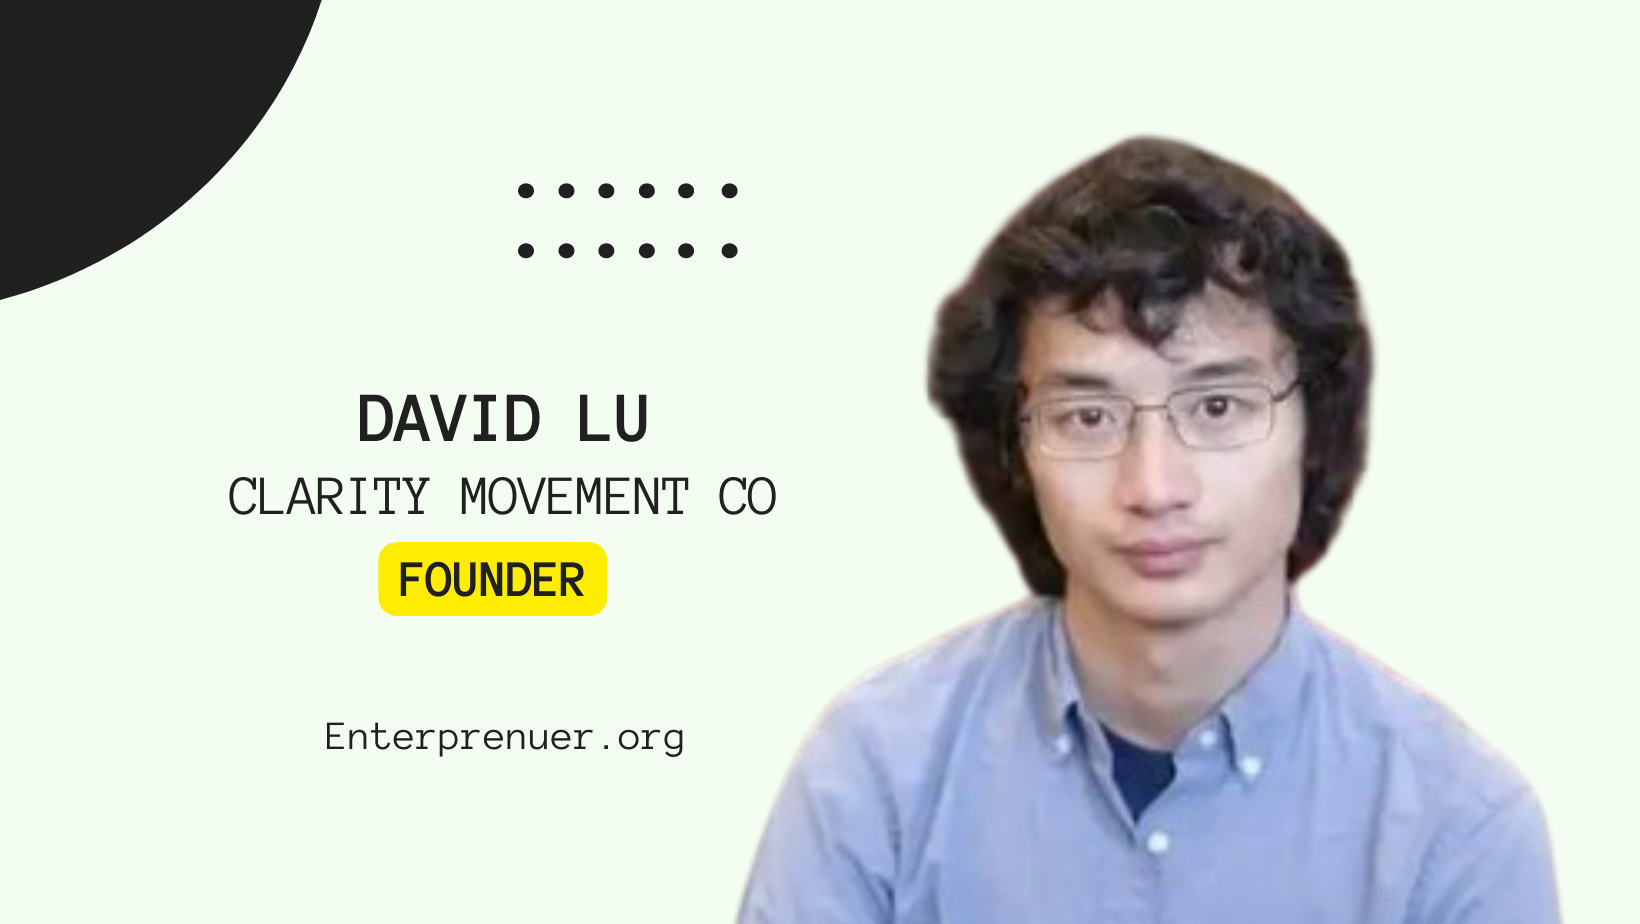 David Lu co-founder and the CEO of Clarity Movement Co